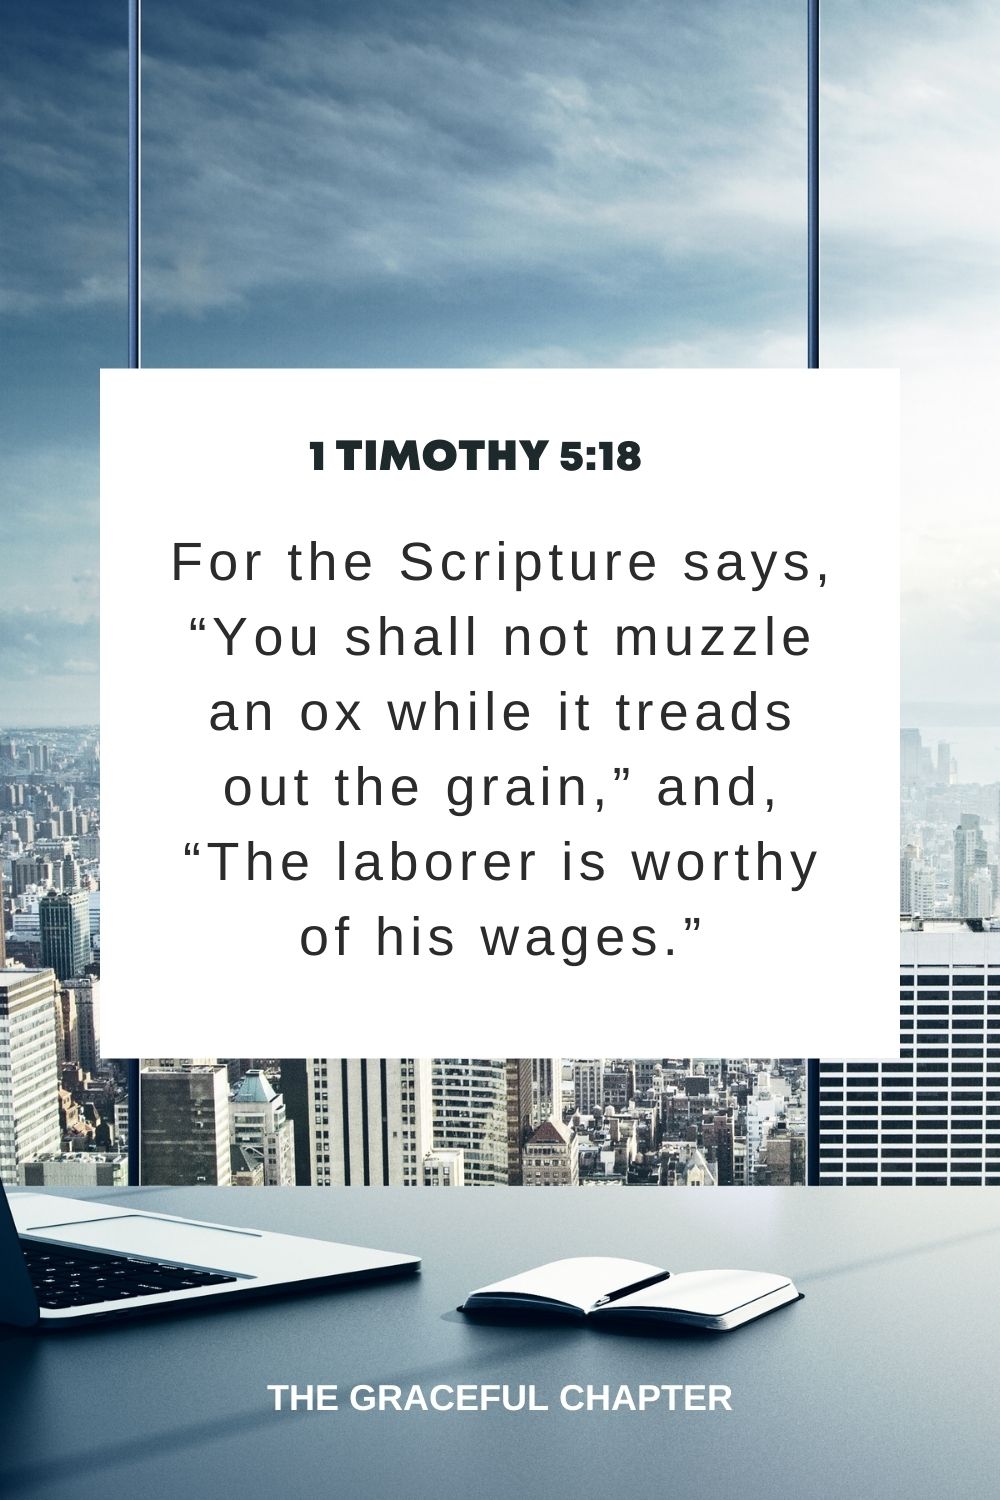 For the Scripture says, “You shall not muzzle an ox while it treads out the grain,” and, “The laborer is worthy of his wages.” 1 Timothy 5:18